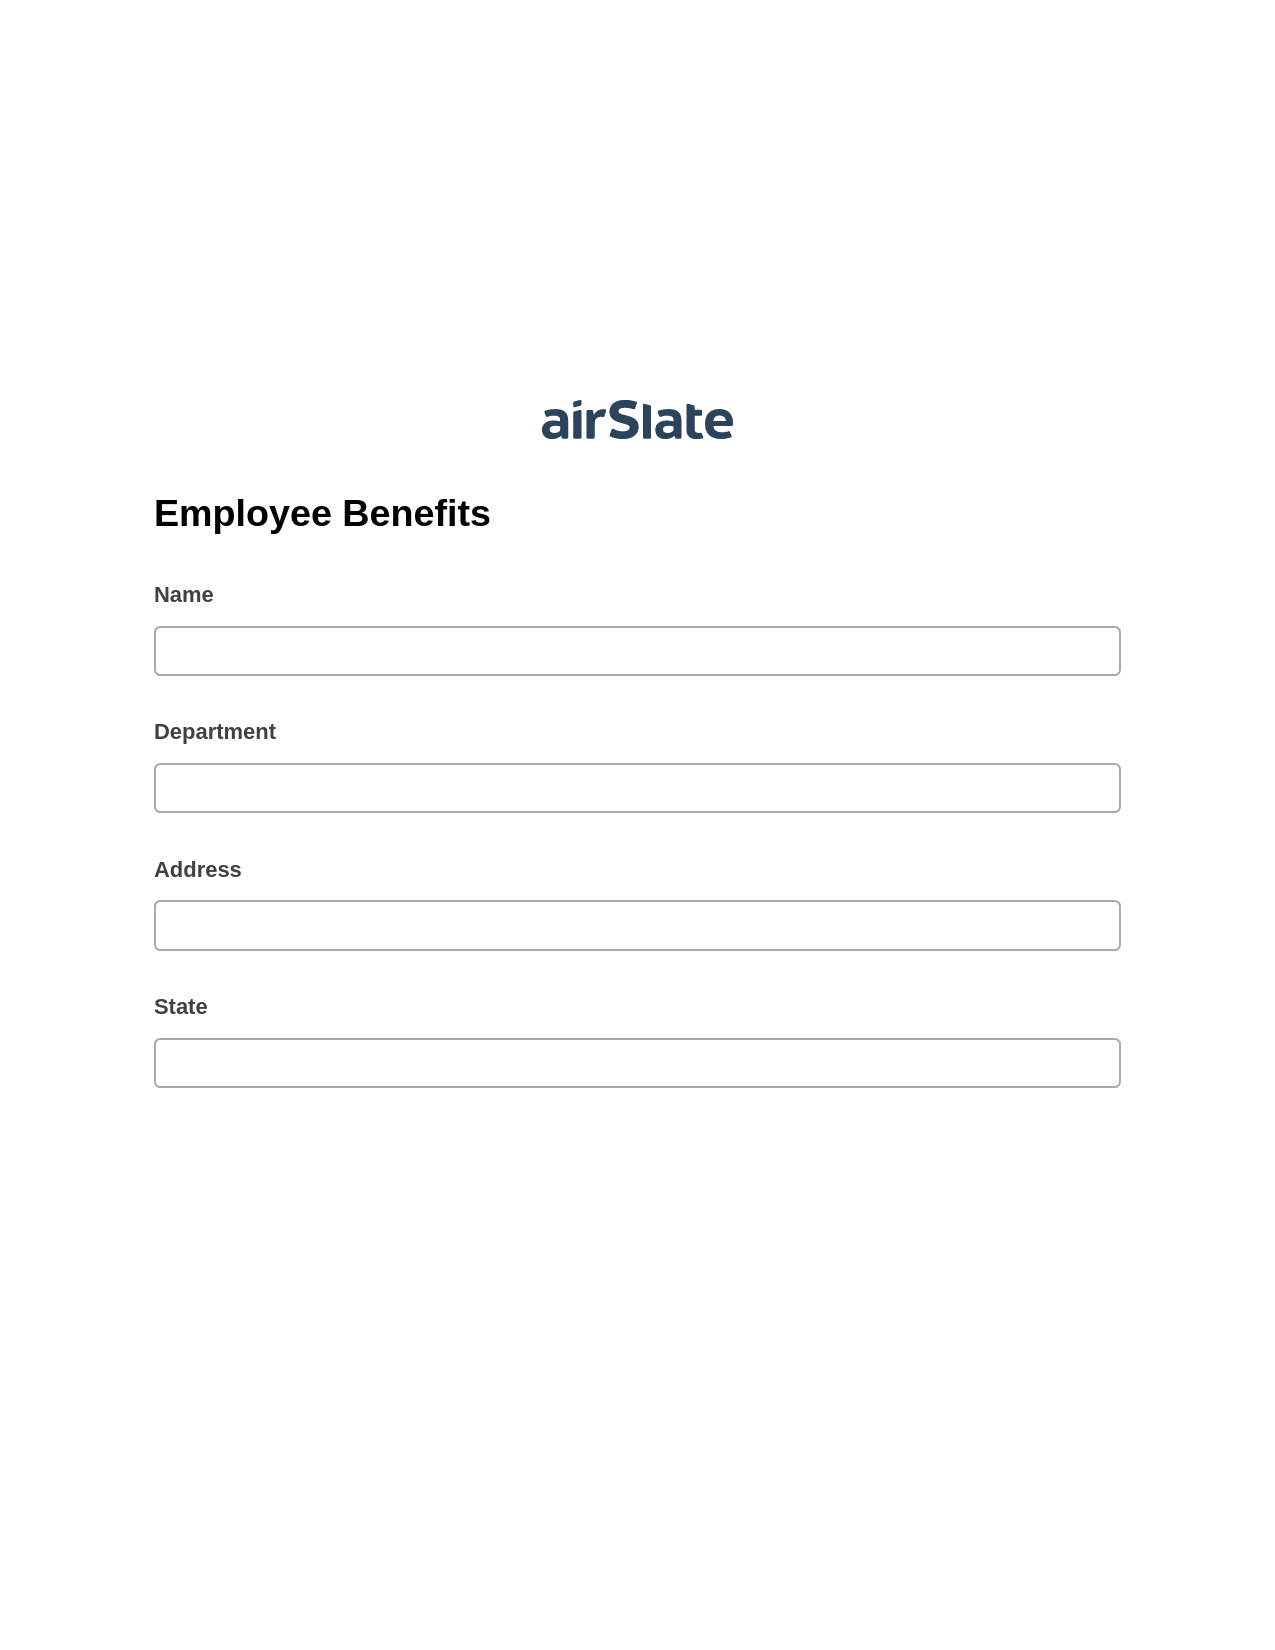 Multirole Employee Benefits Pre-fill Dropdowns from MySQL Bot, Lock the slate bot, Export to Excel 365 Bot